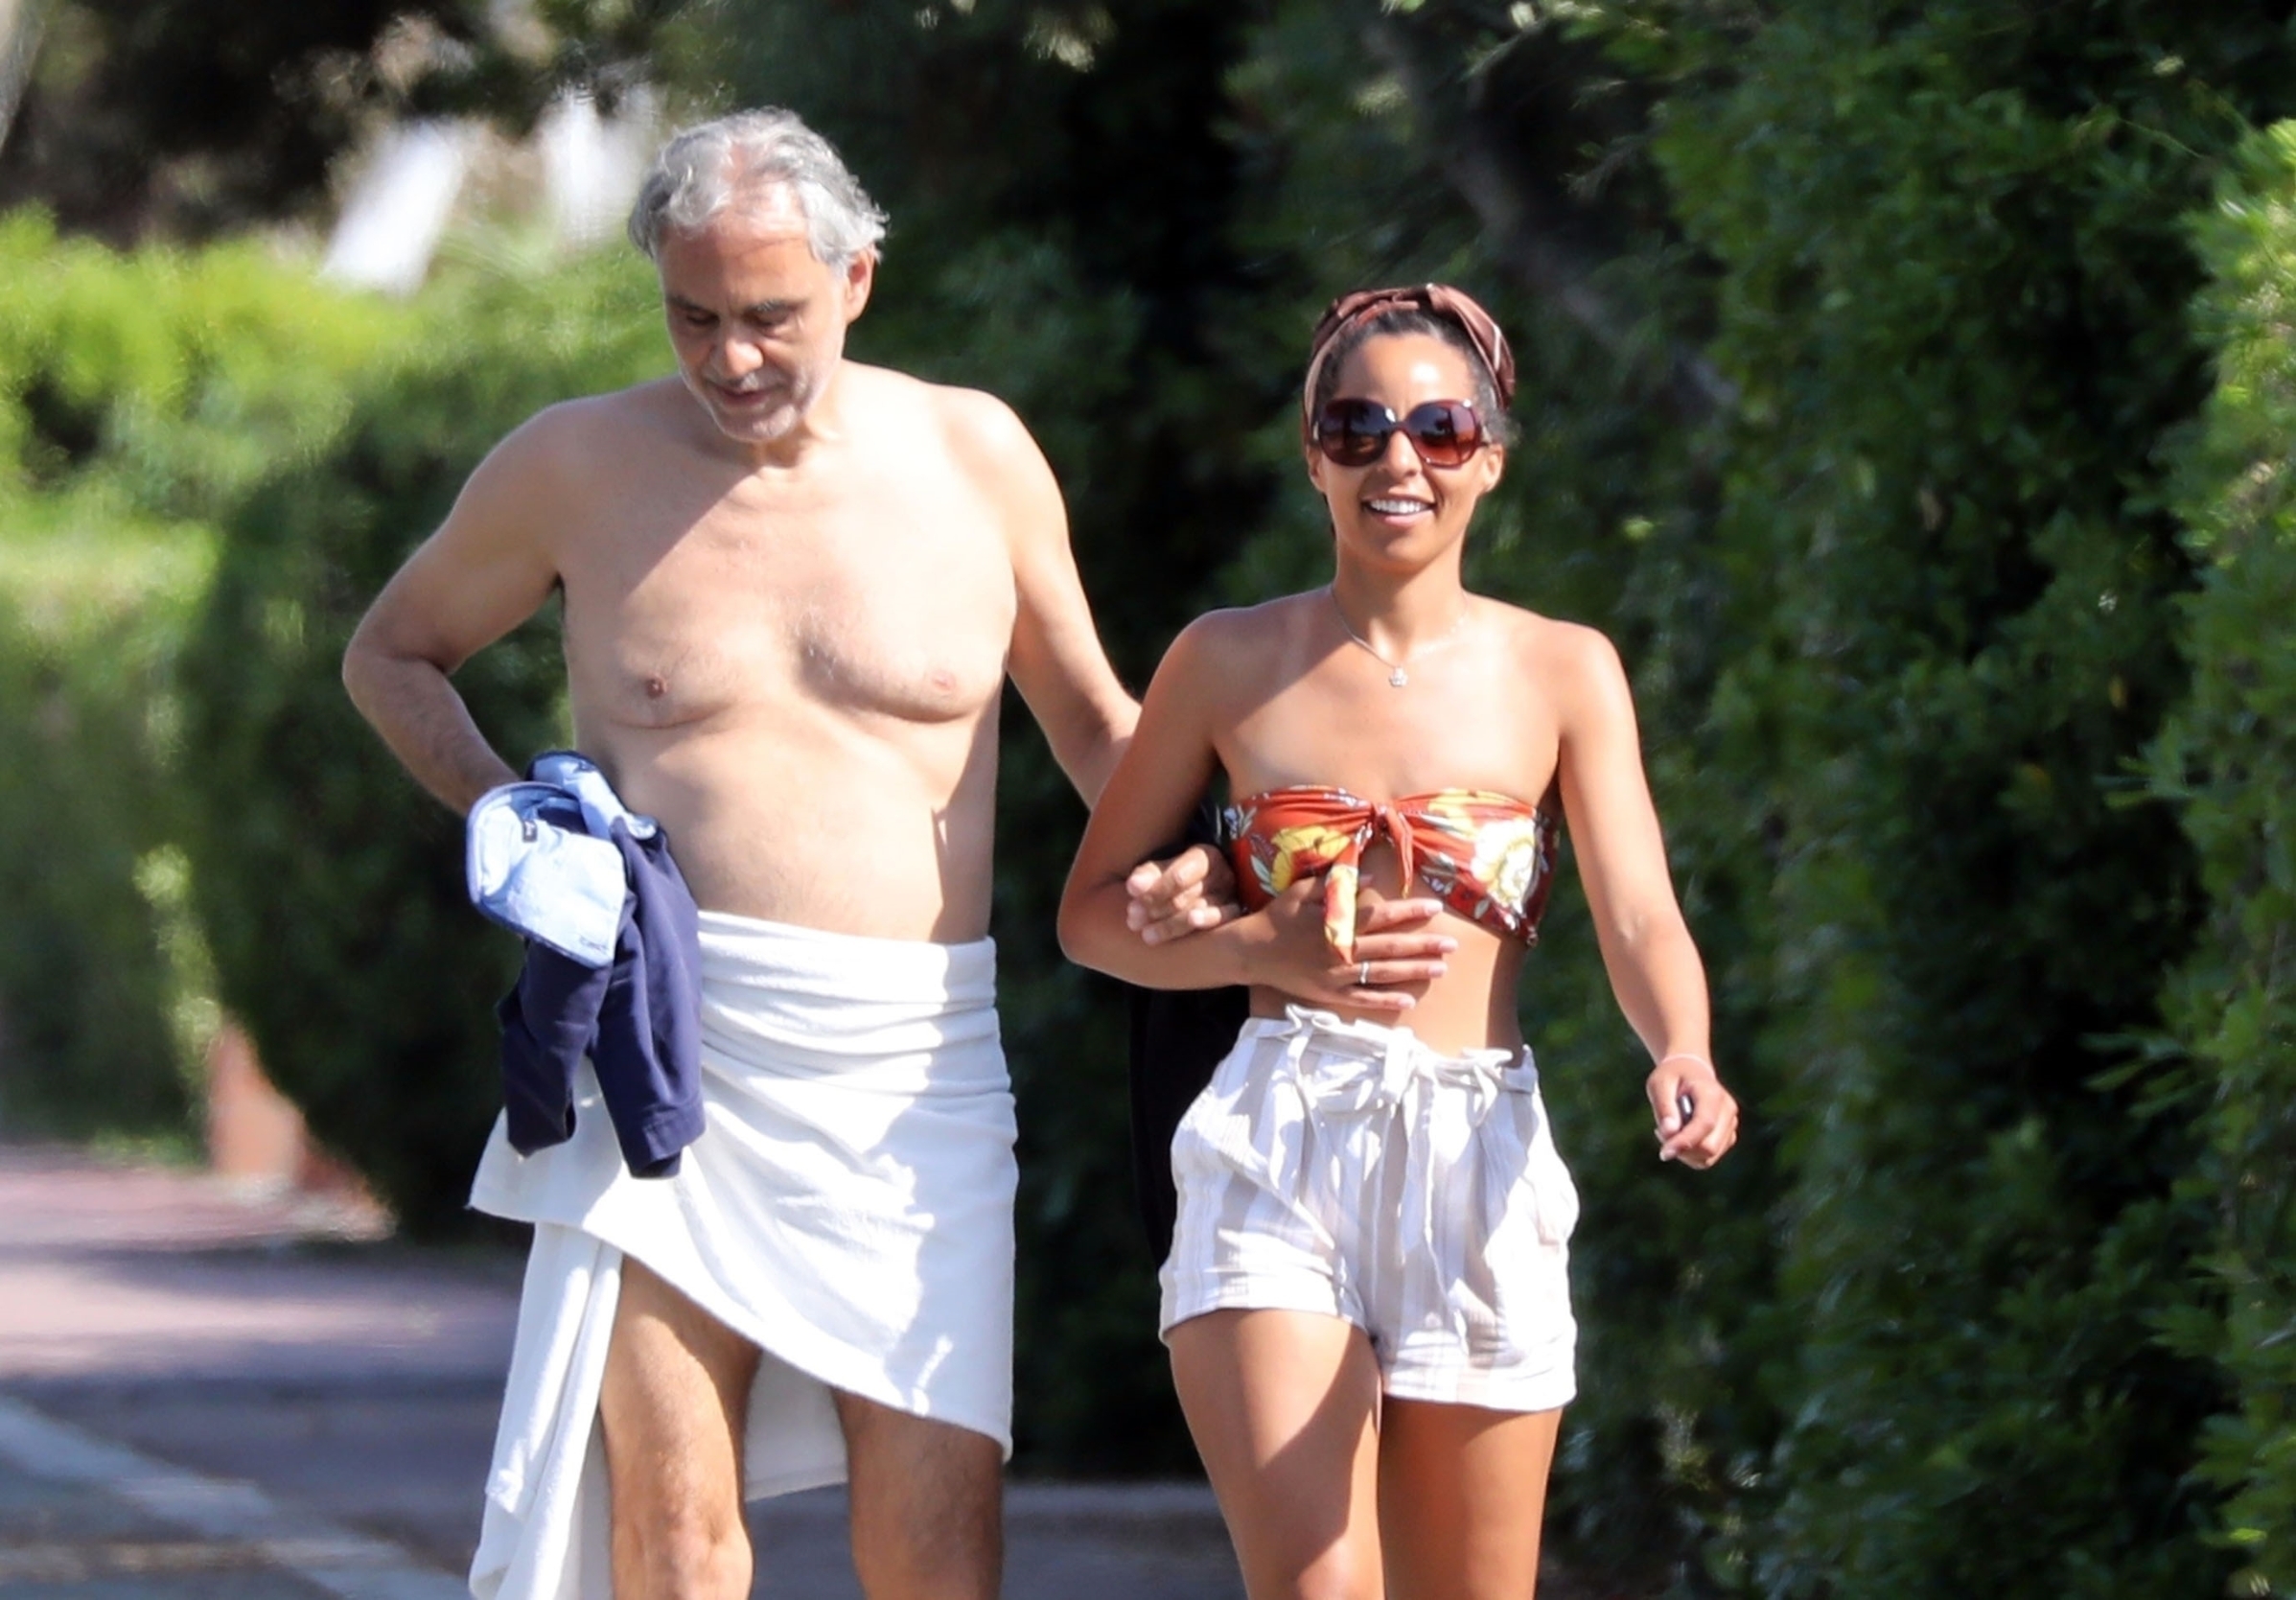 Forte dei Marmi, Lucca, ITALY  - *EXCLUSIVE*  - MUST CALL FOR PRICING BEFORE USAGE  - Italian singer and Opera star Andrea Bocelli looks in good health after revealing recently that he contracted Coronavirus and made a full recovery by the end of March!

The singer was seen on the streets of Forte Dei Marmi dressed only with a towel in the company of a South American friend.

*UK Clients - Pictures Containing Children
Please Pixelate Face Prior To Publication*, Image: 522882914, License: Rights-managed, Restrictions: RIGHTS: WORLDWIDE EXCEPT IN GERMANY, ITALY, Model Release: no, Credit line: BACKGRID / Backgrid UK / Profimedia